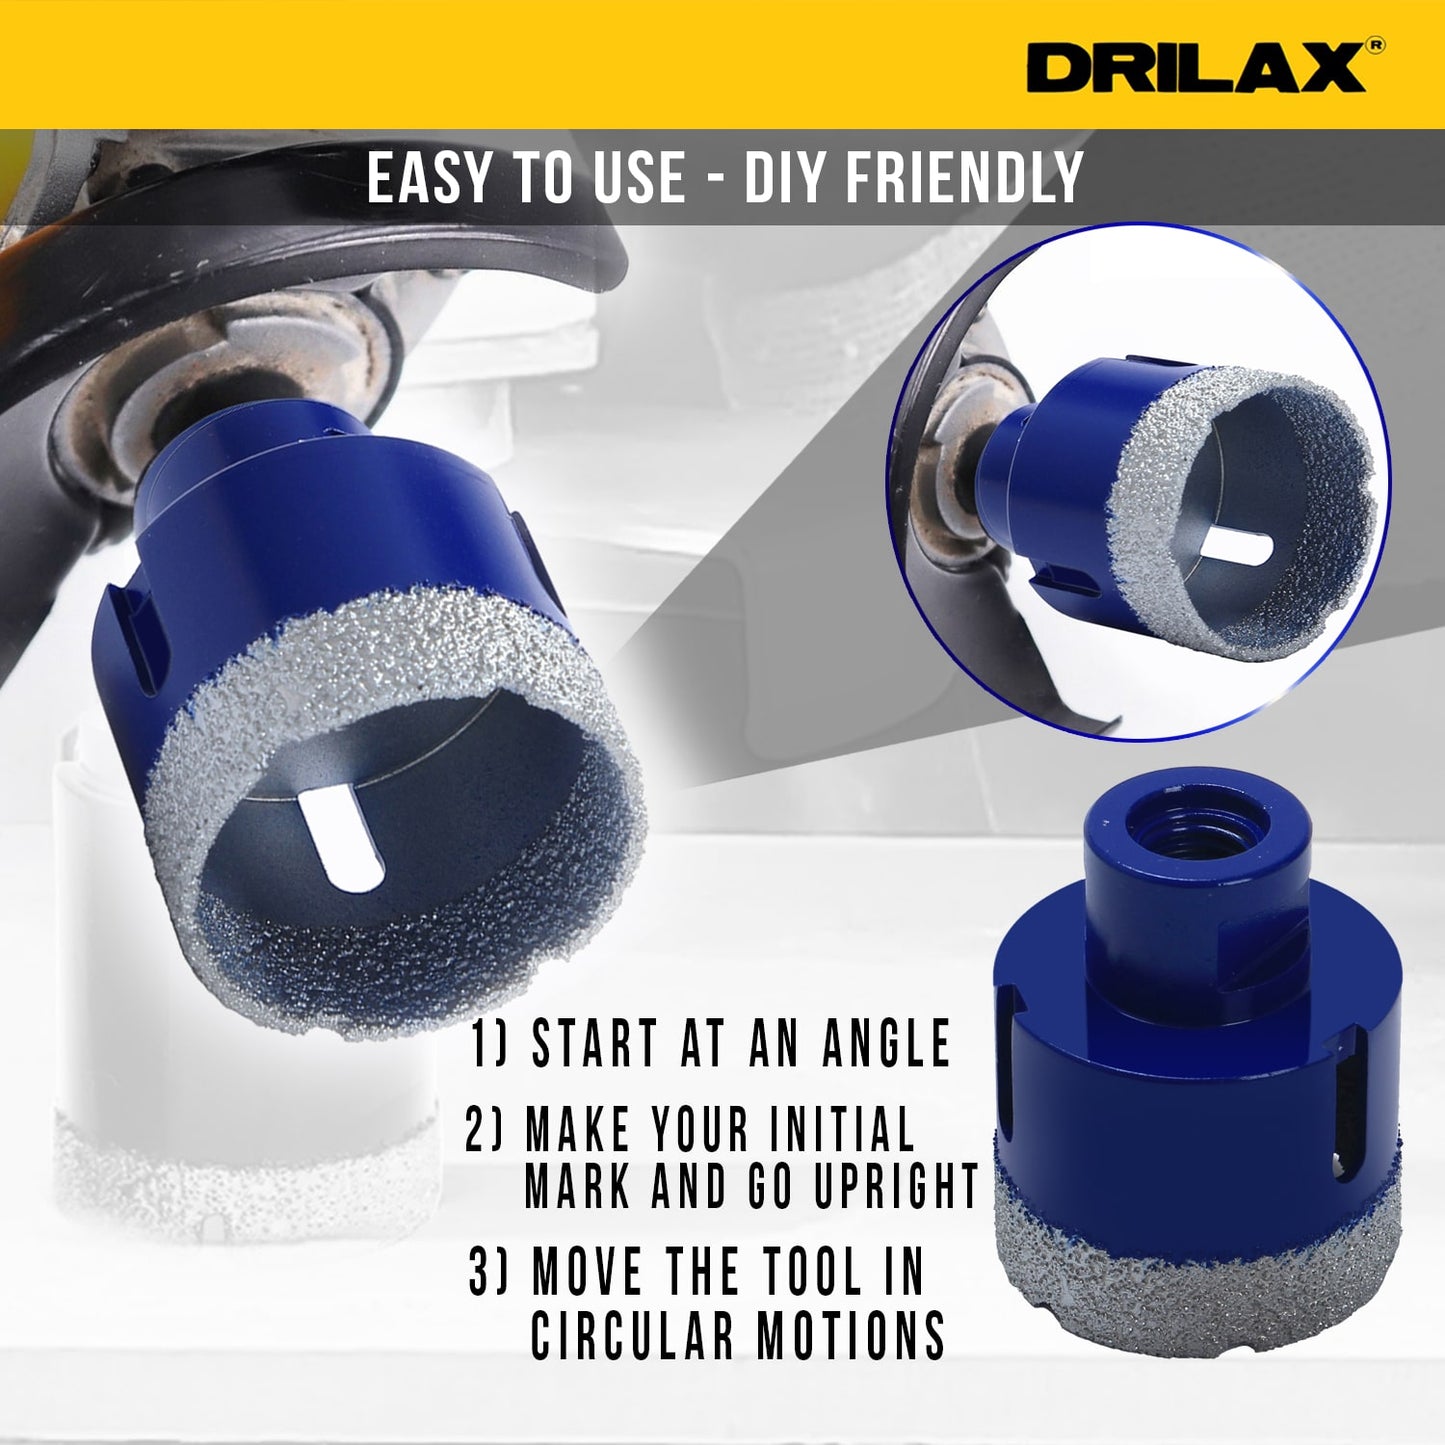 Heavy Duty Diamond Hole Saw Core Drill Bit 5/8-11 Inch Threaded Connection Professional Grade Sizes 1 inch to 4 inches